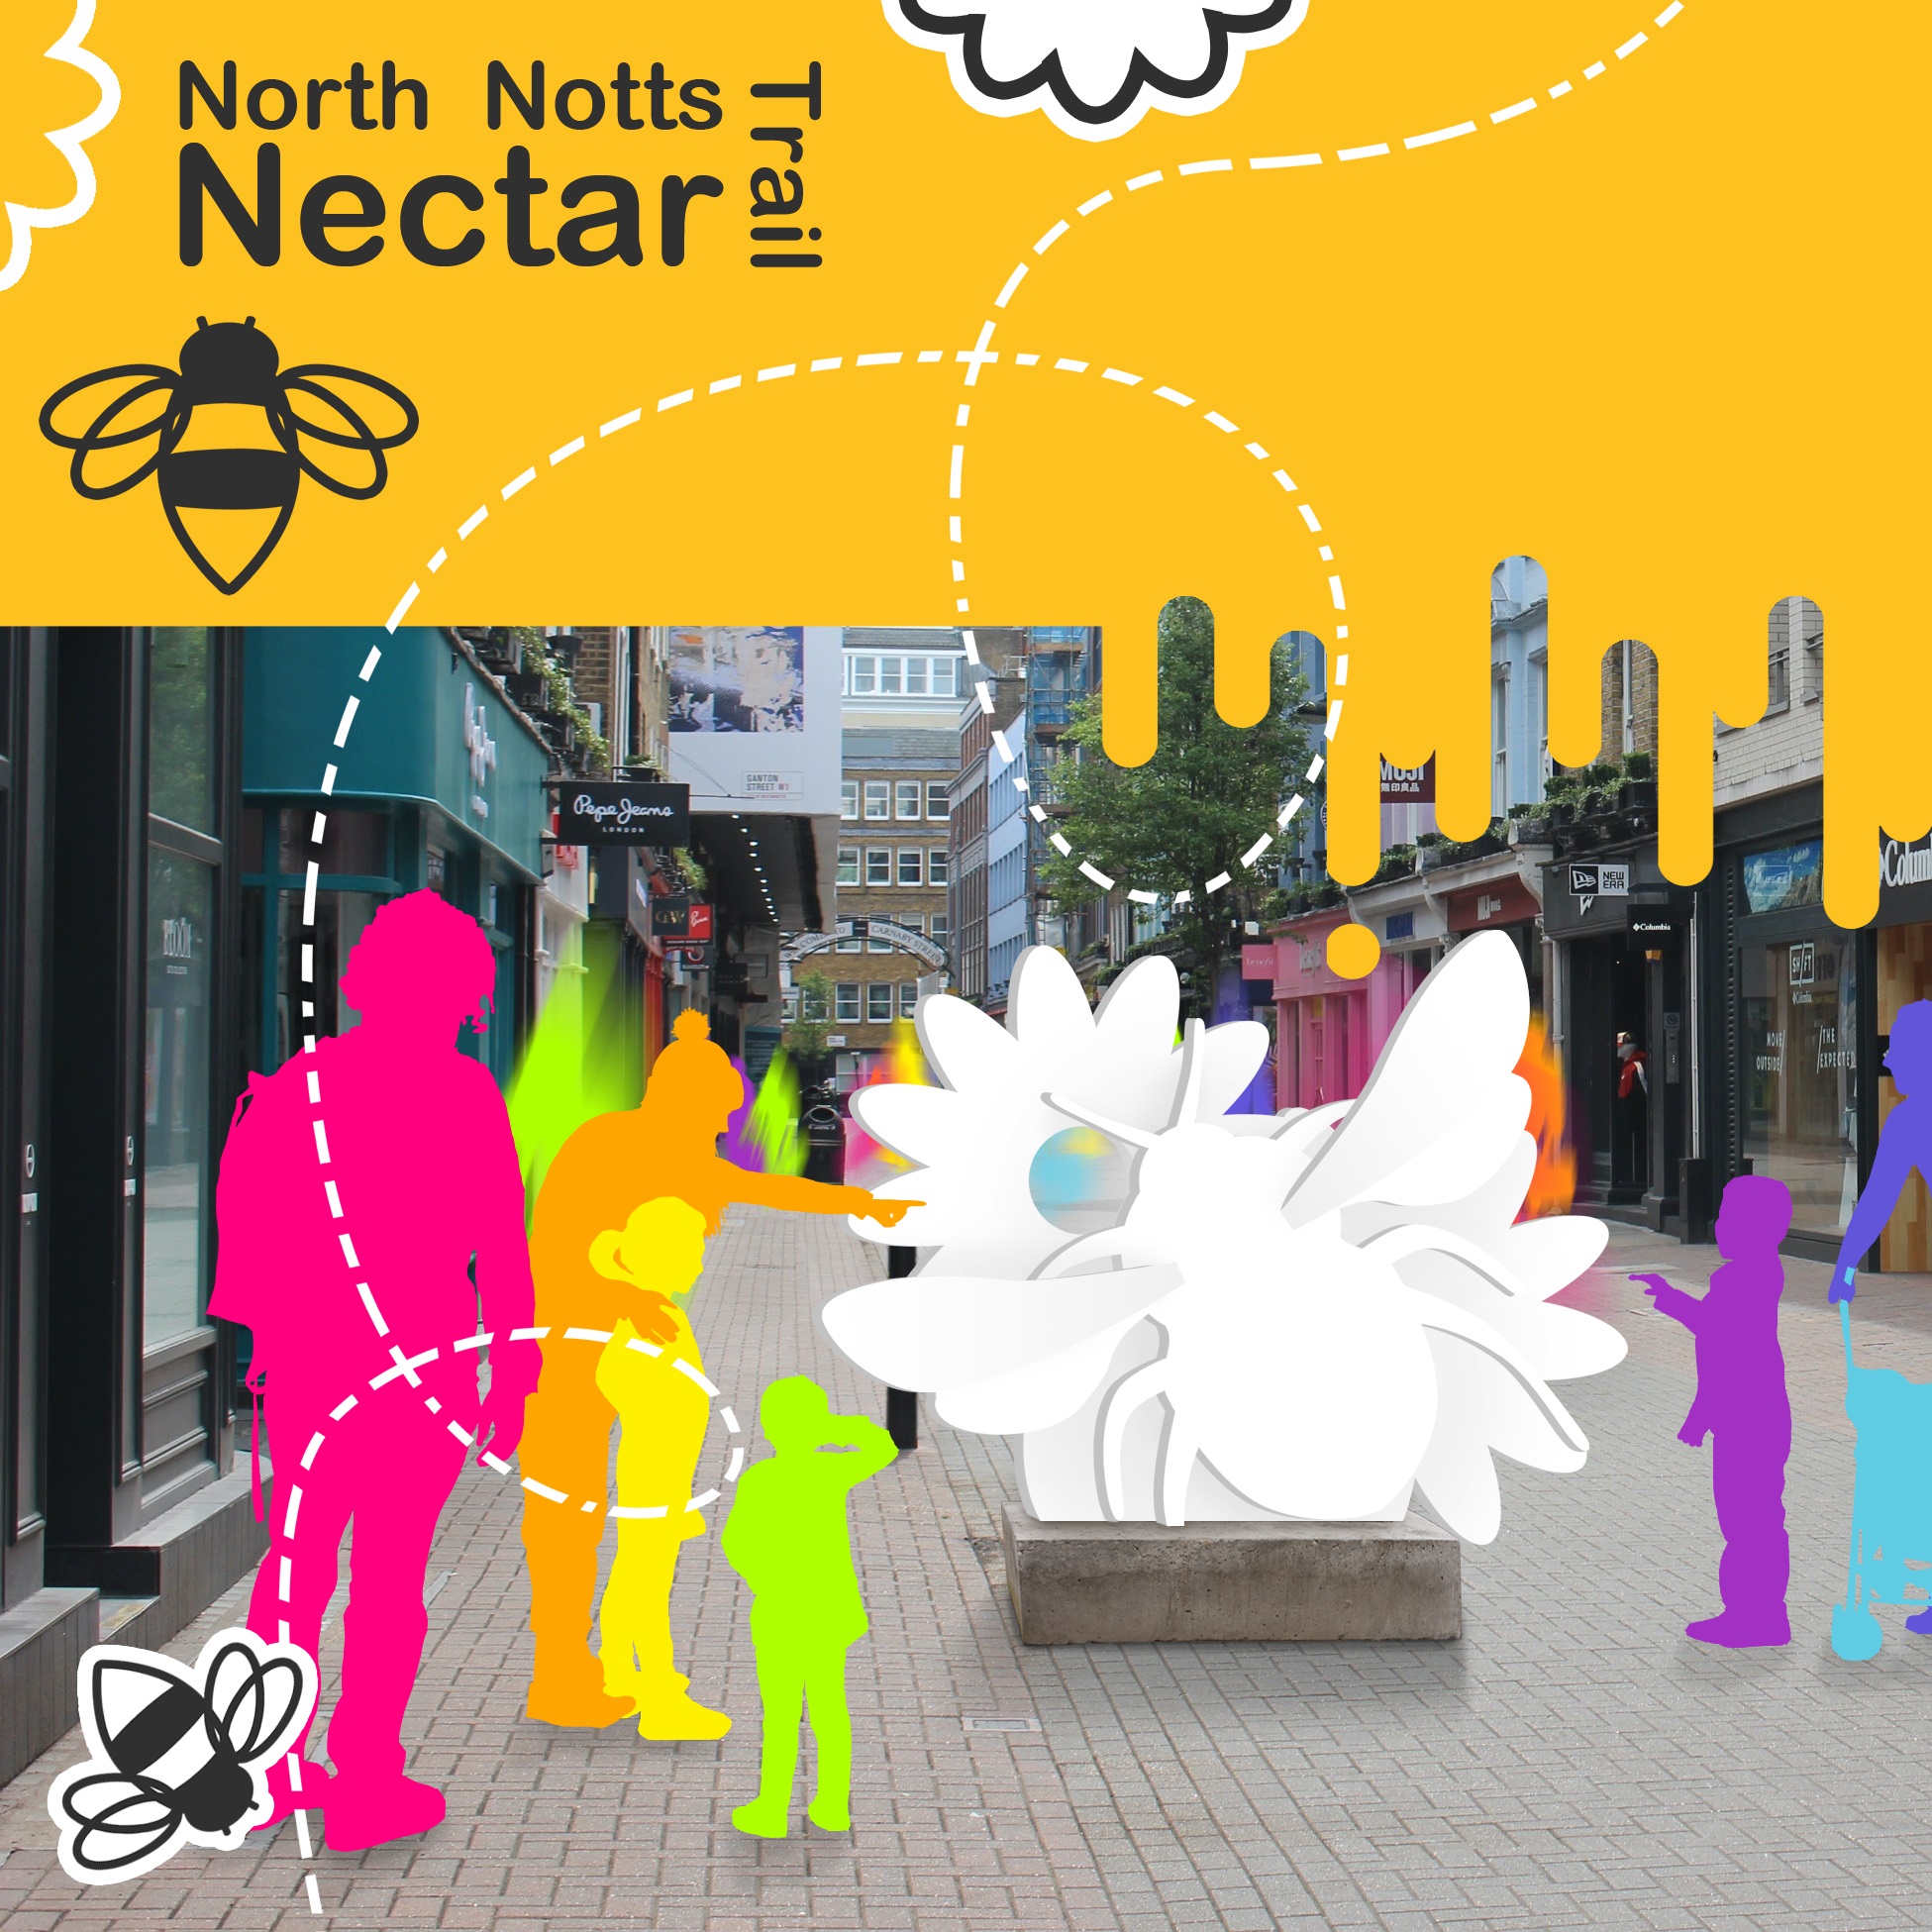 Call for Sponsors as Buzz Builds for Bee Sculpture Trail